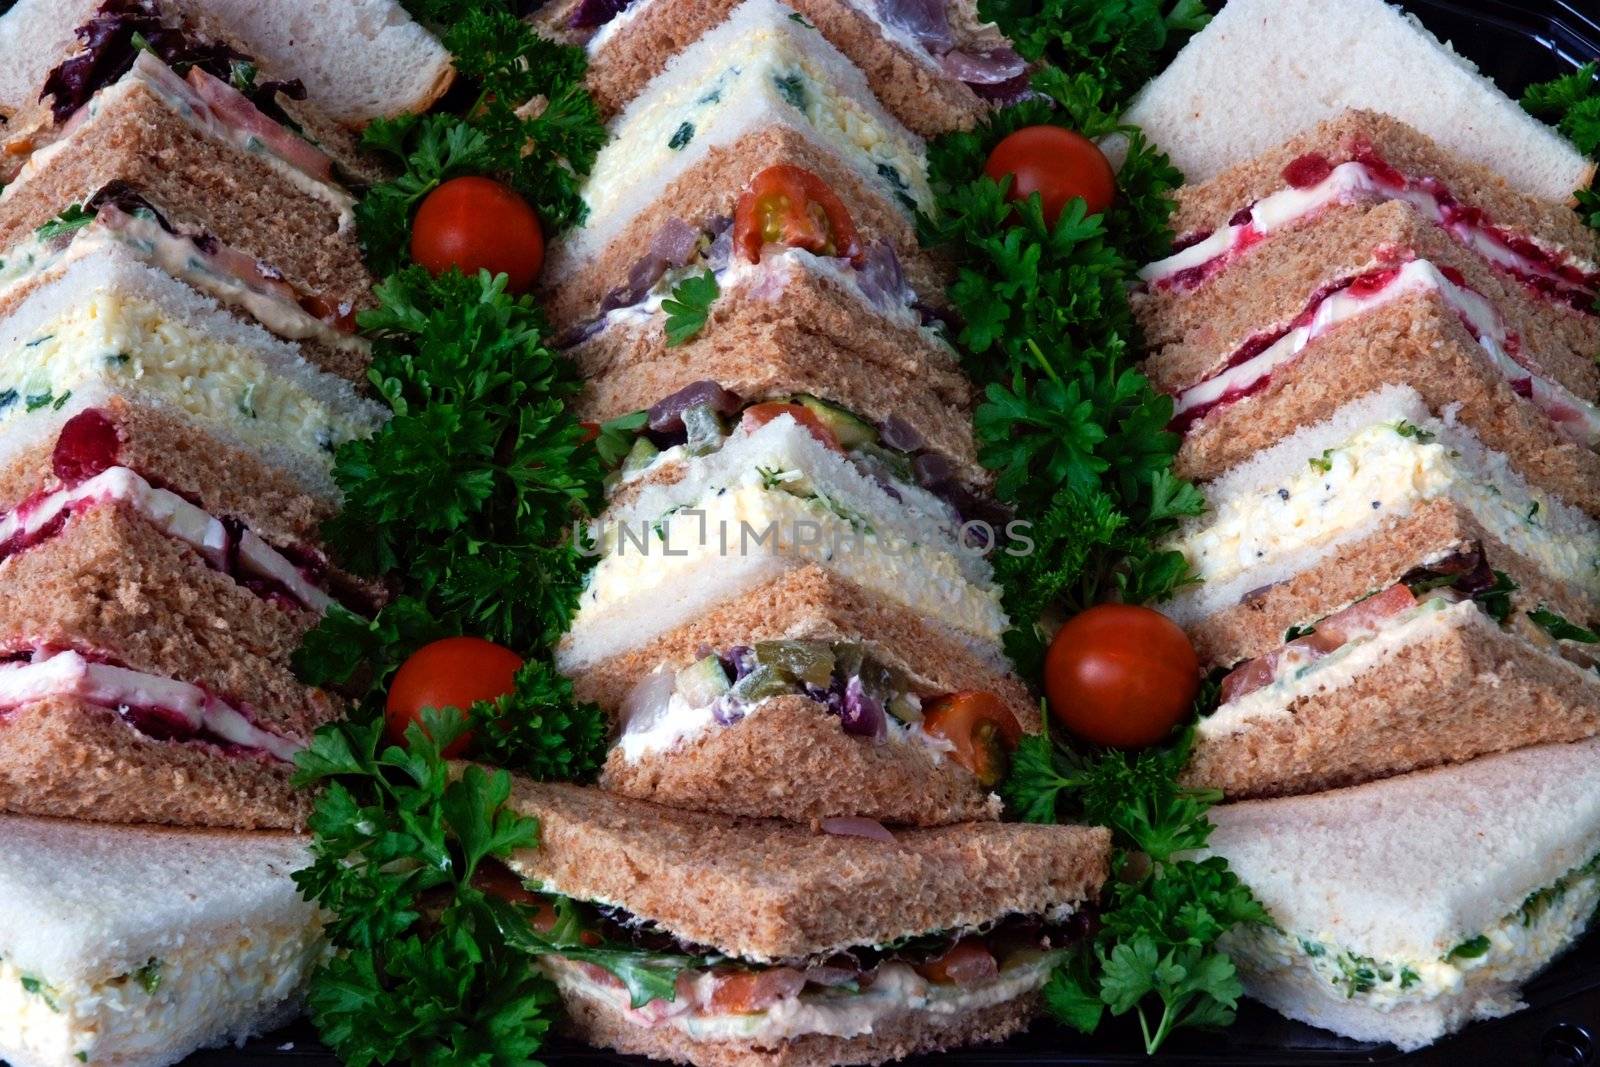 Sandwiches cut into triangles on a tray prepared for a business lunch